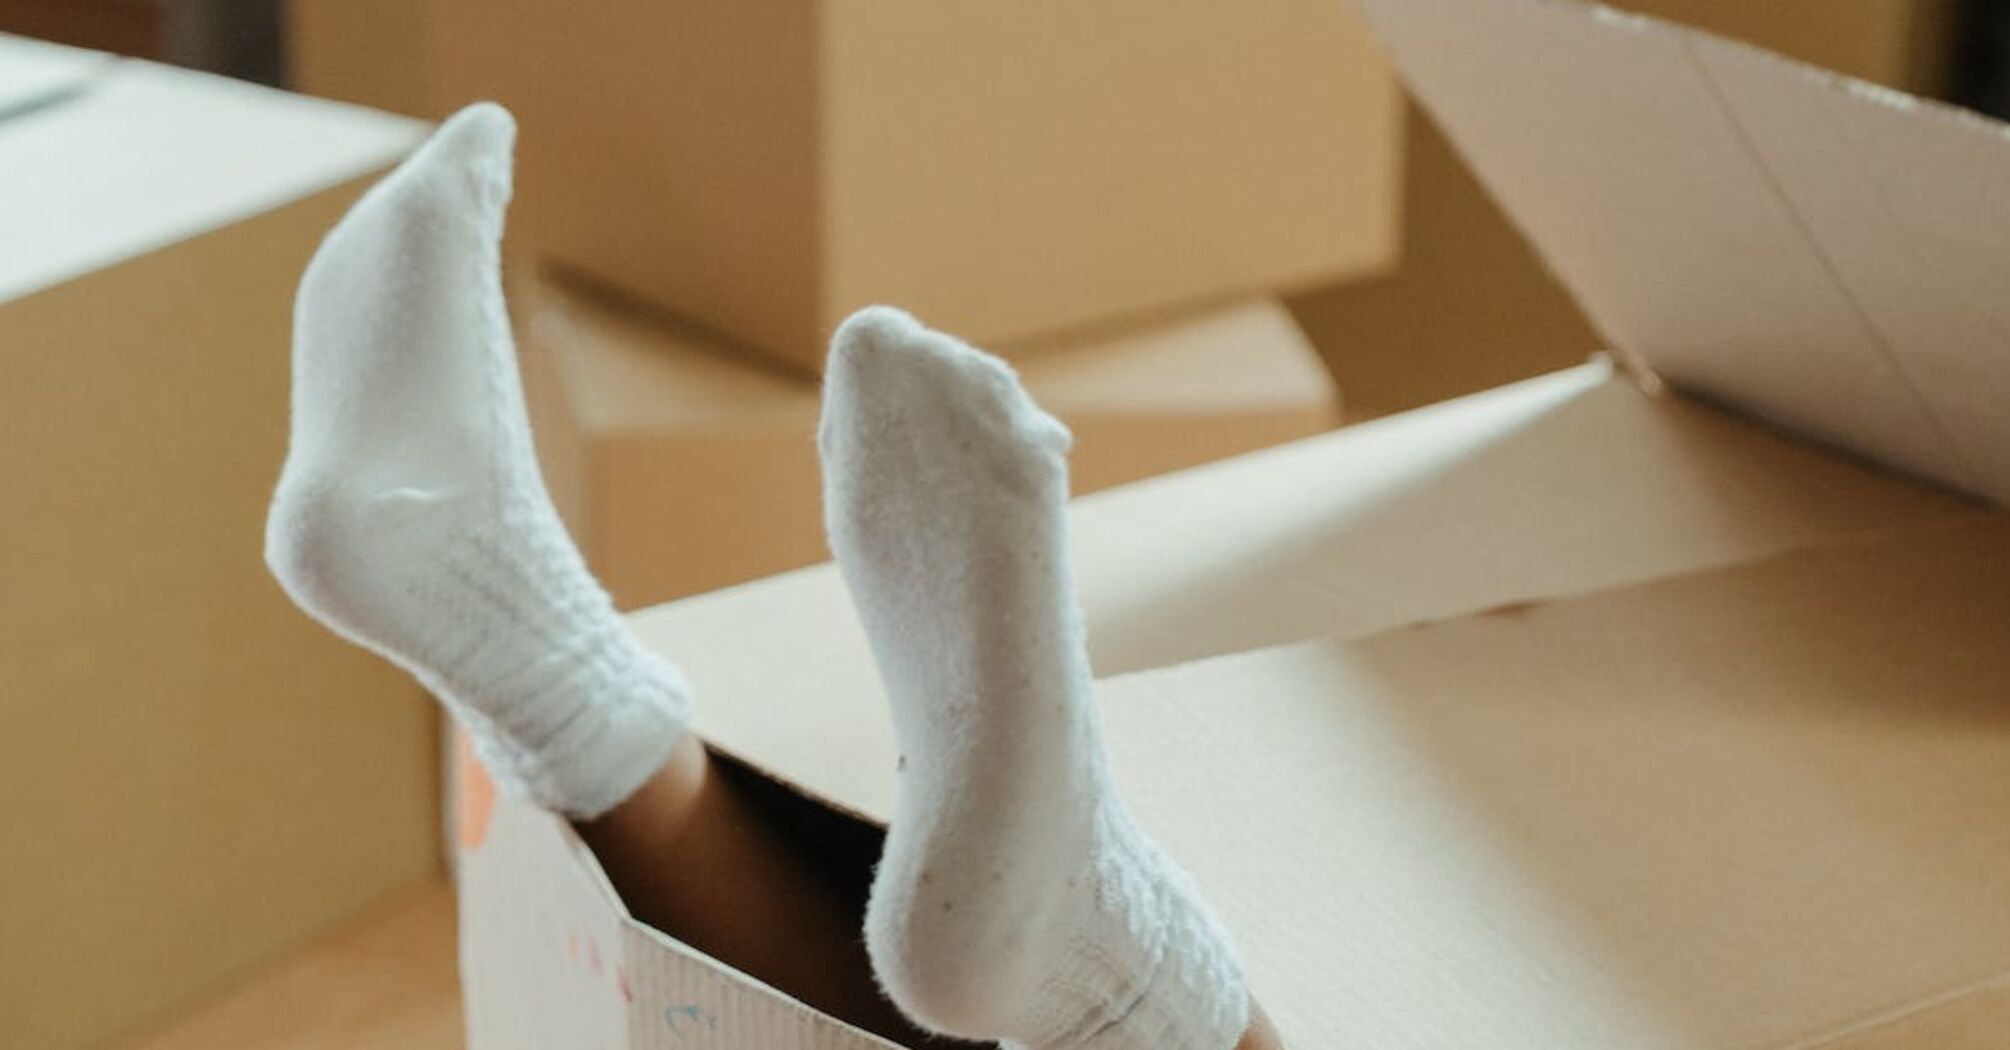 Even the dirtiest socks will become clean thanks to these simple folk methods